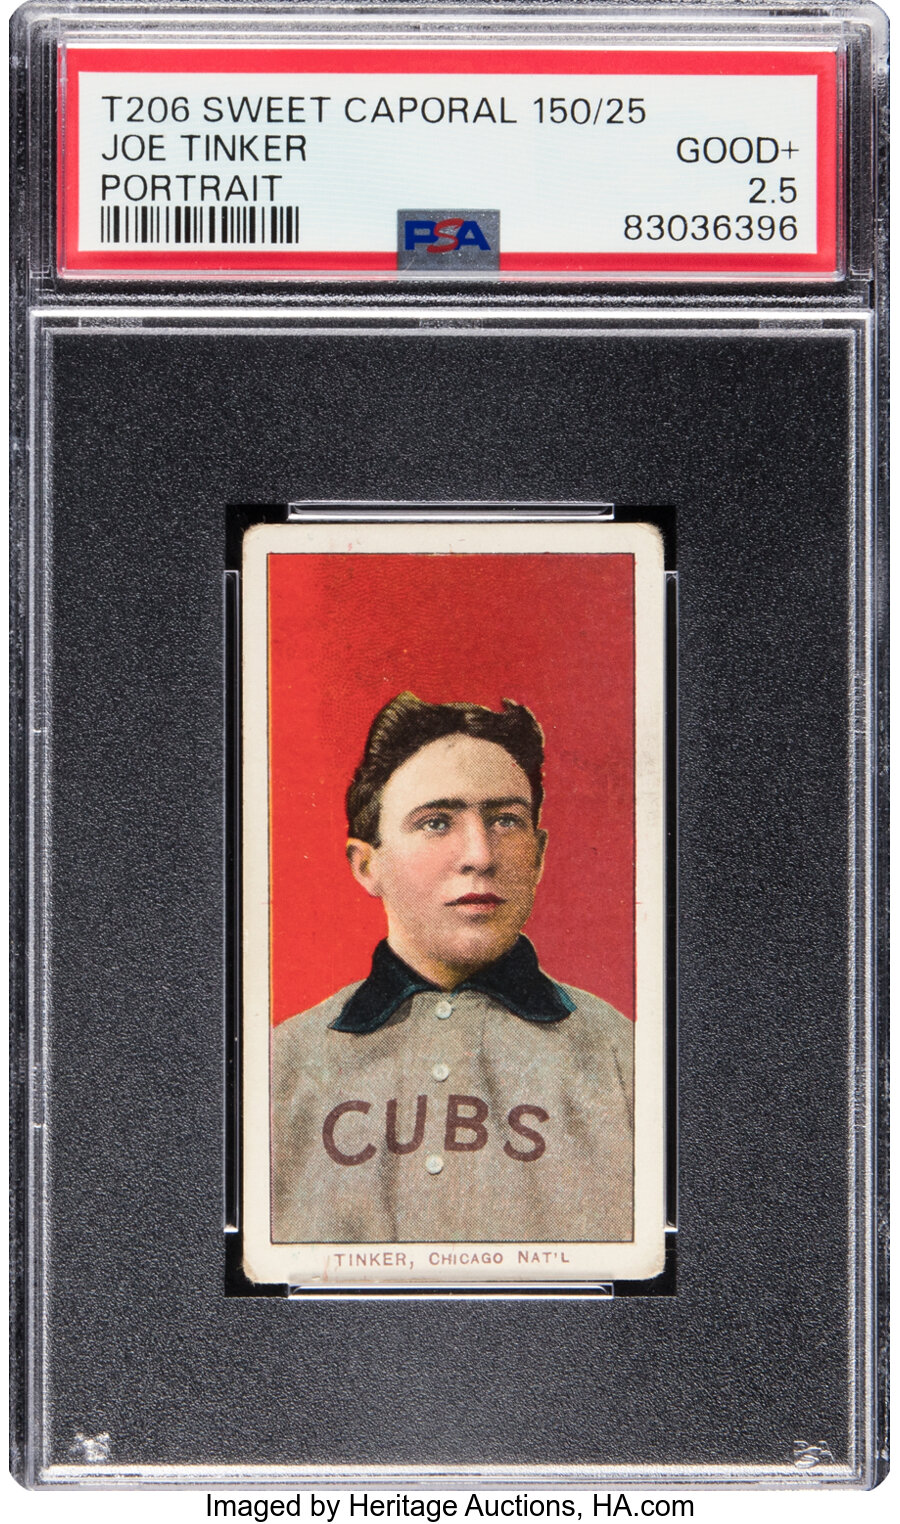 1909-11 T206 Sweet Caporal Joe Tinker (Portrait) PSA Good+ 2.5 -- From The Ramsburg Collection